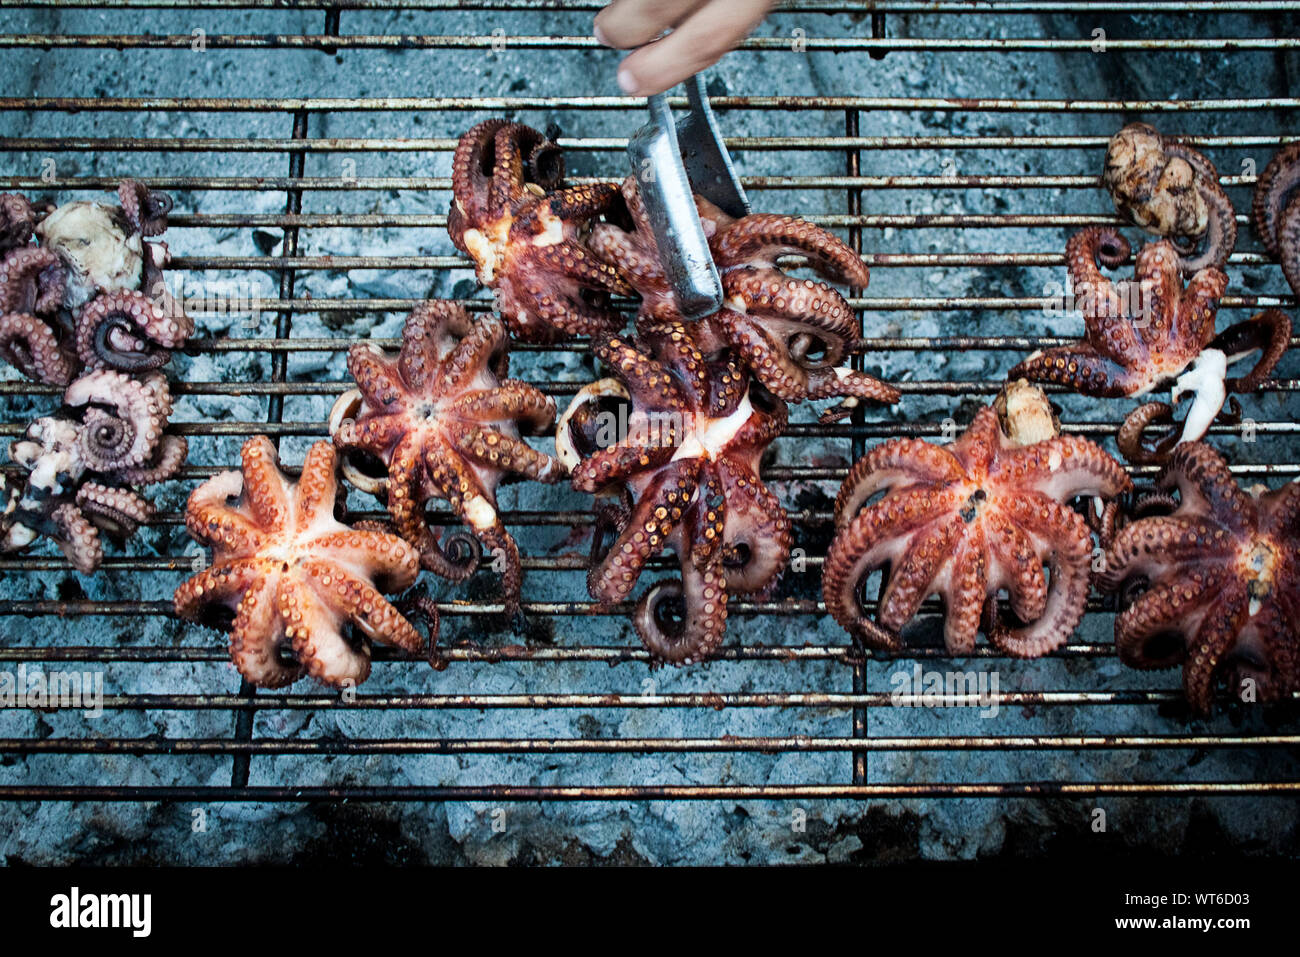 Cropped Image Of Hand Cooking Octopus On Barbecue Stock Photo